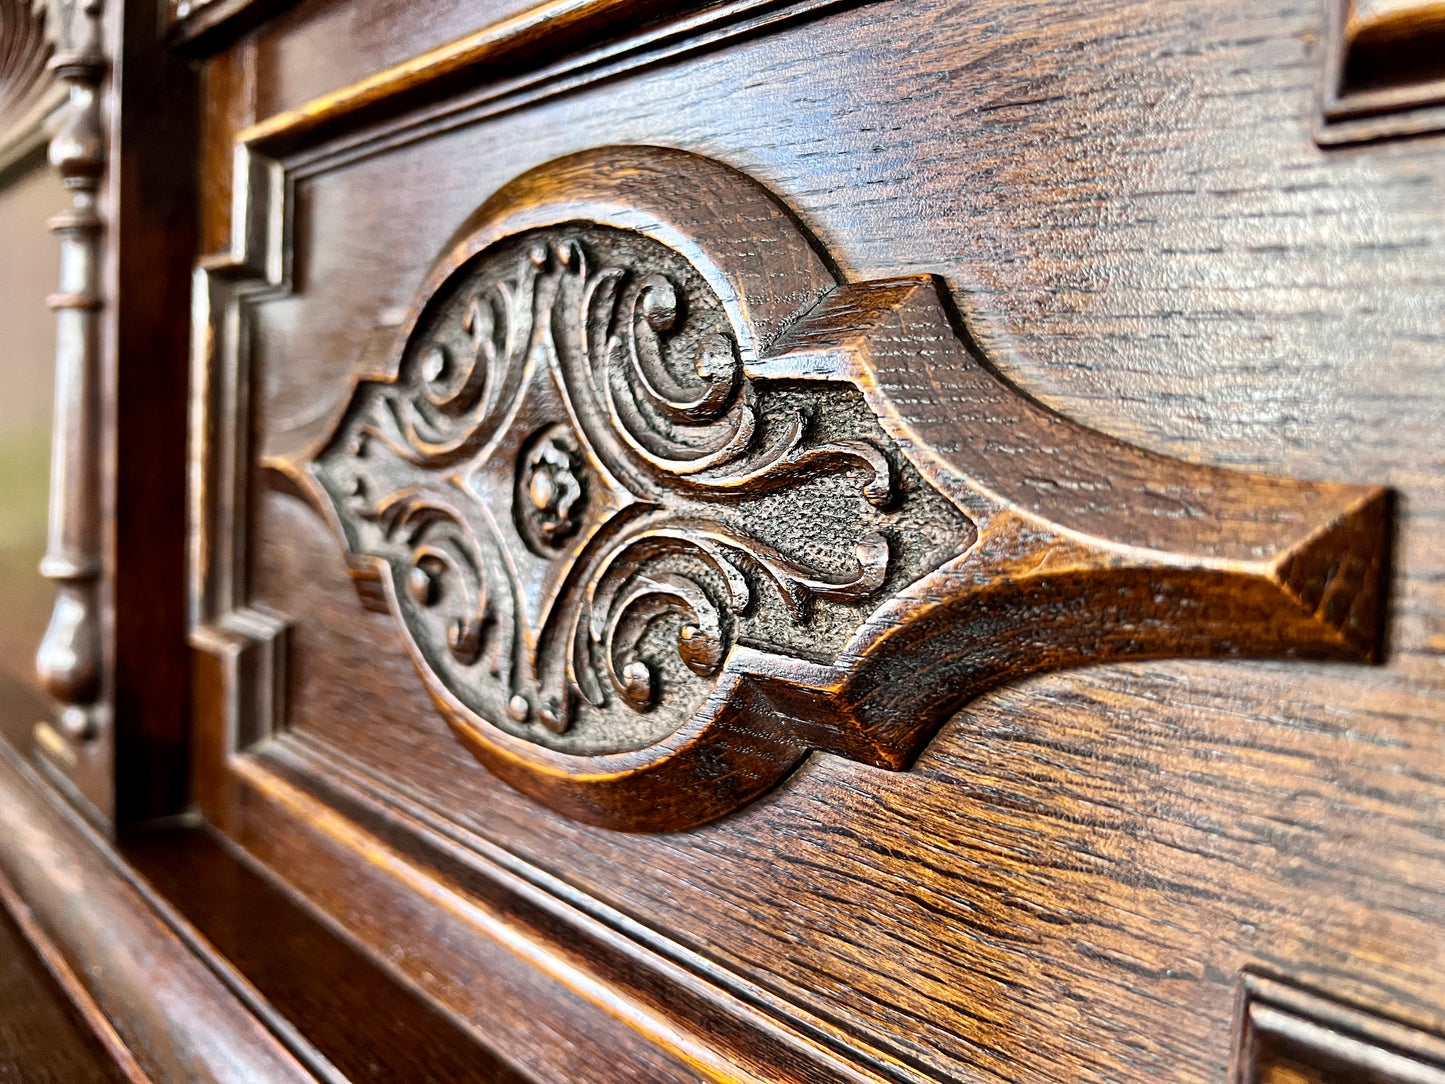 The Luther Sideboard